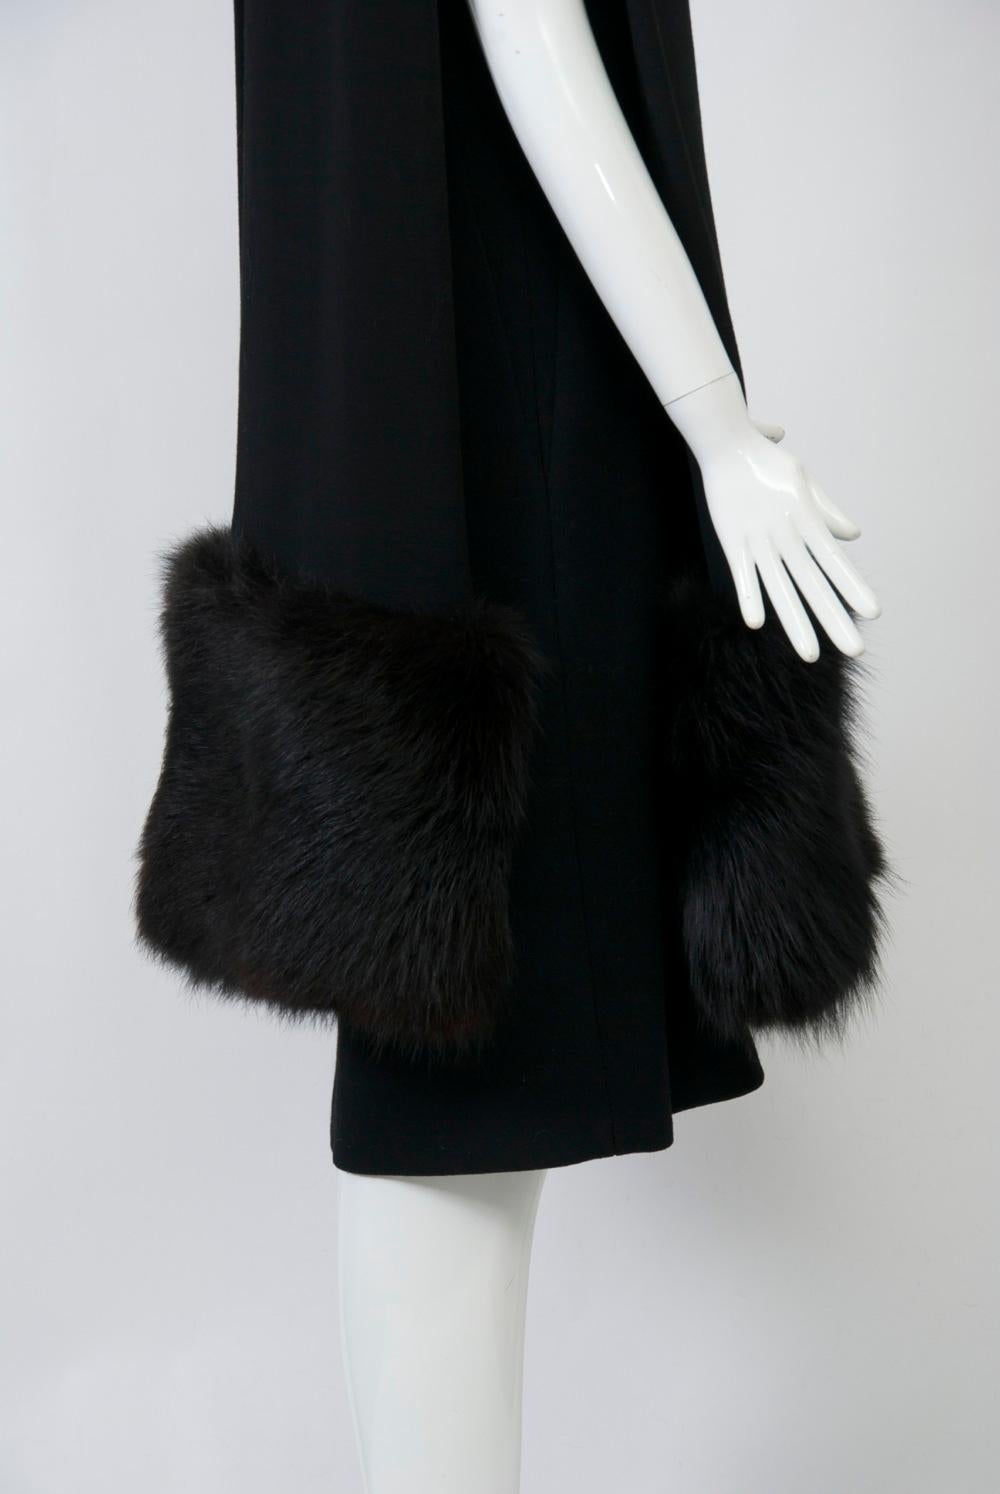 Pauline Trigère Ensemble with Fox Trim In Good Condition For Sale In Alford, MA